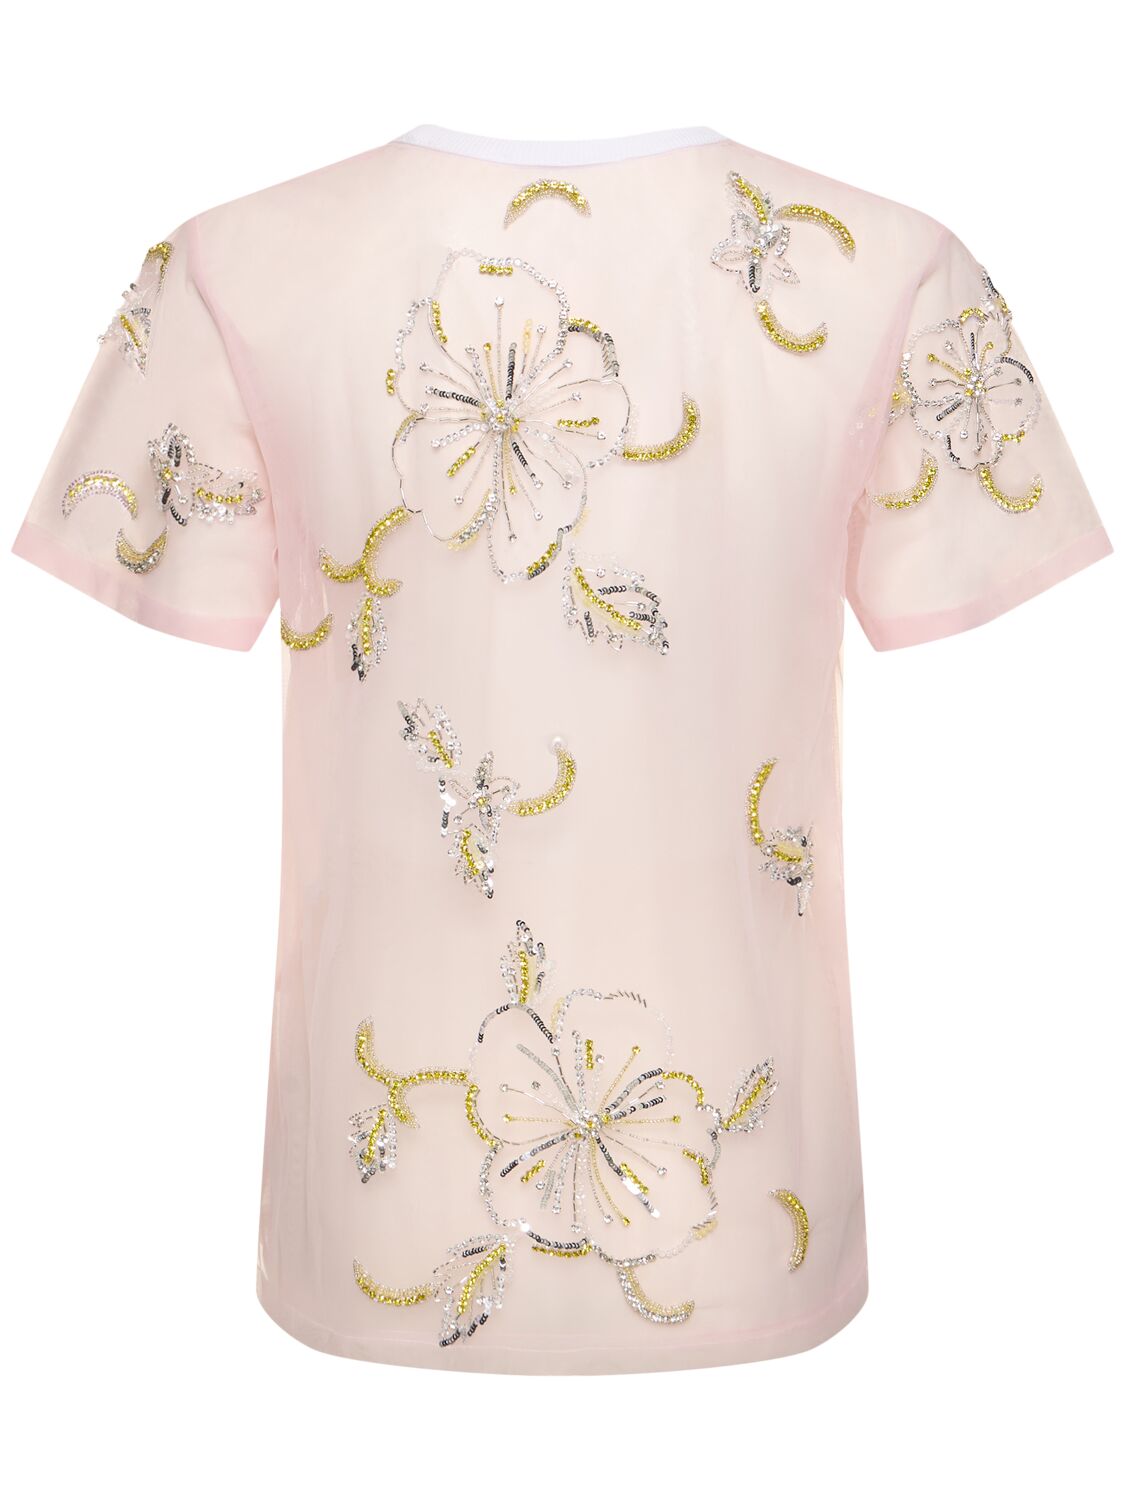 Shop Des Phemmes Hibiscus Embroidered Tulle Top In White,lime